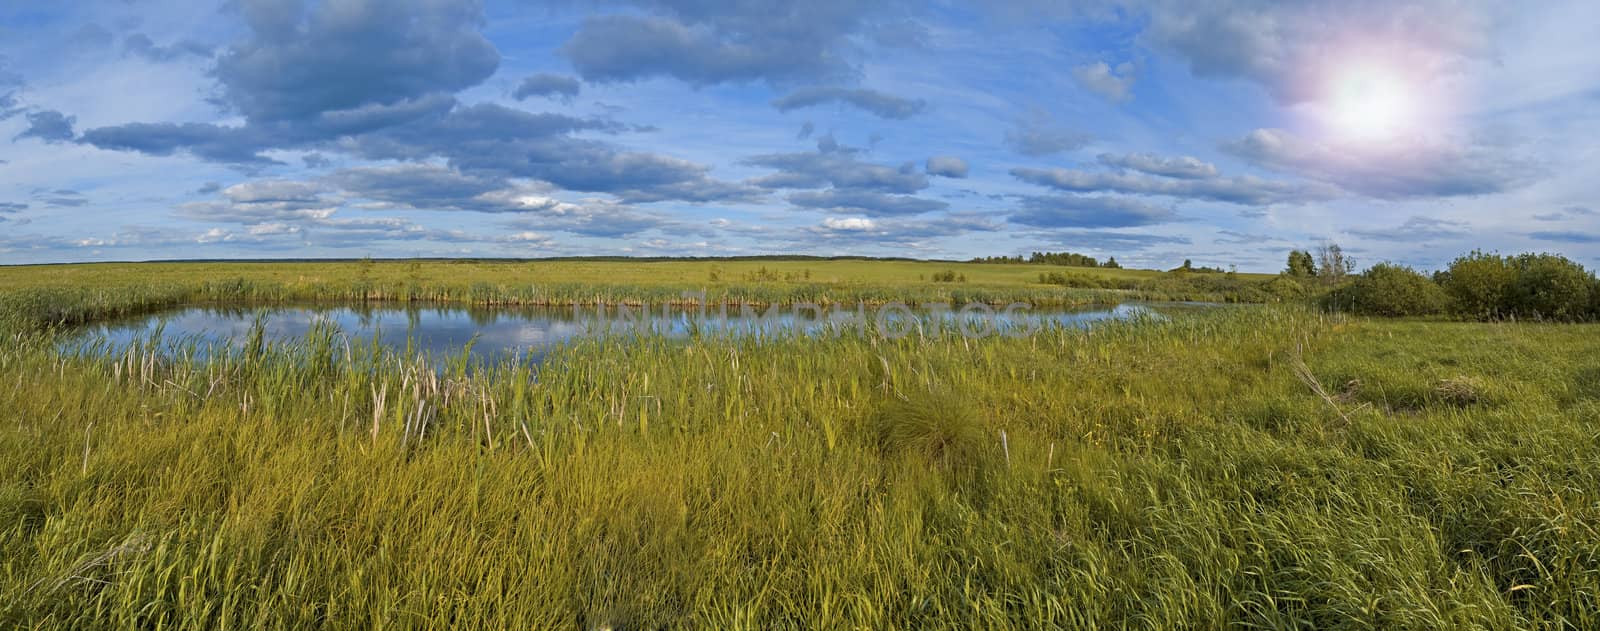 Panoramic shot of the small pond in the middle of the fields and meadows surrounded by swamp.